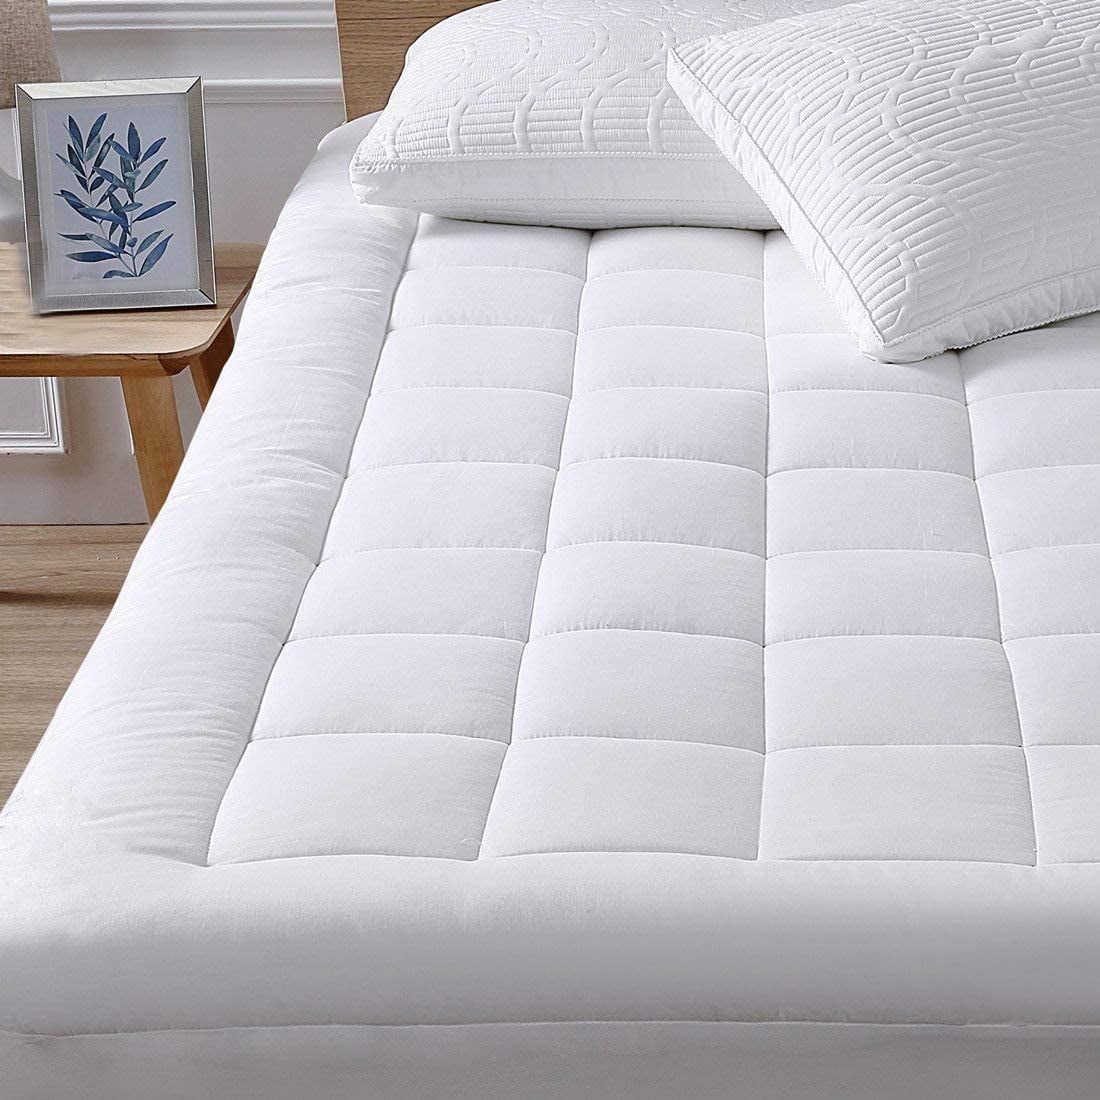 Luxury Quilted Mattress Protector Single Double King Super king 4fit Bed Size 